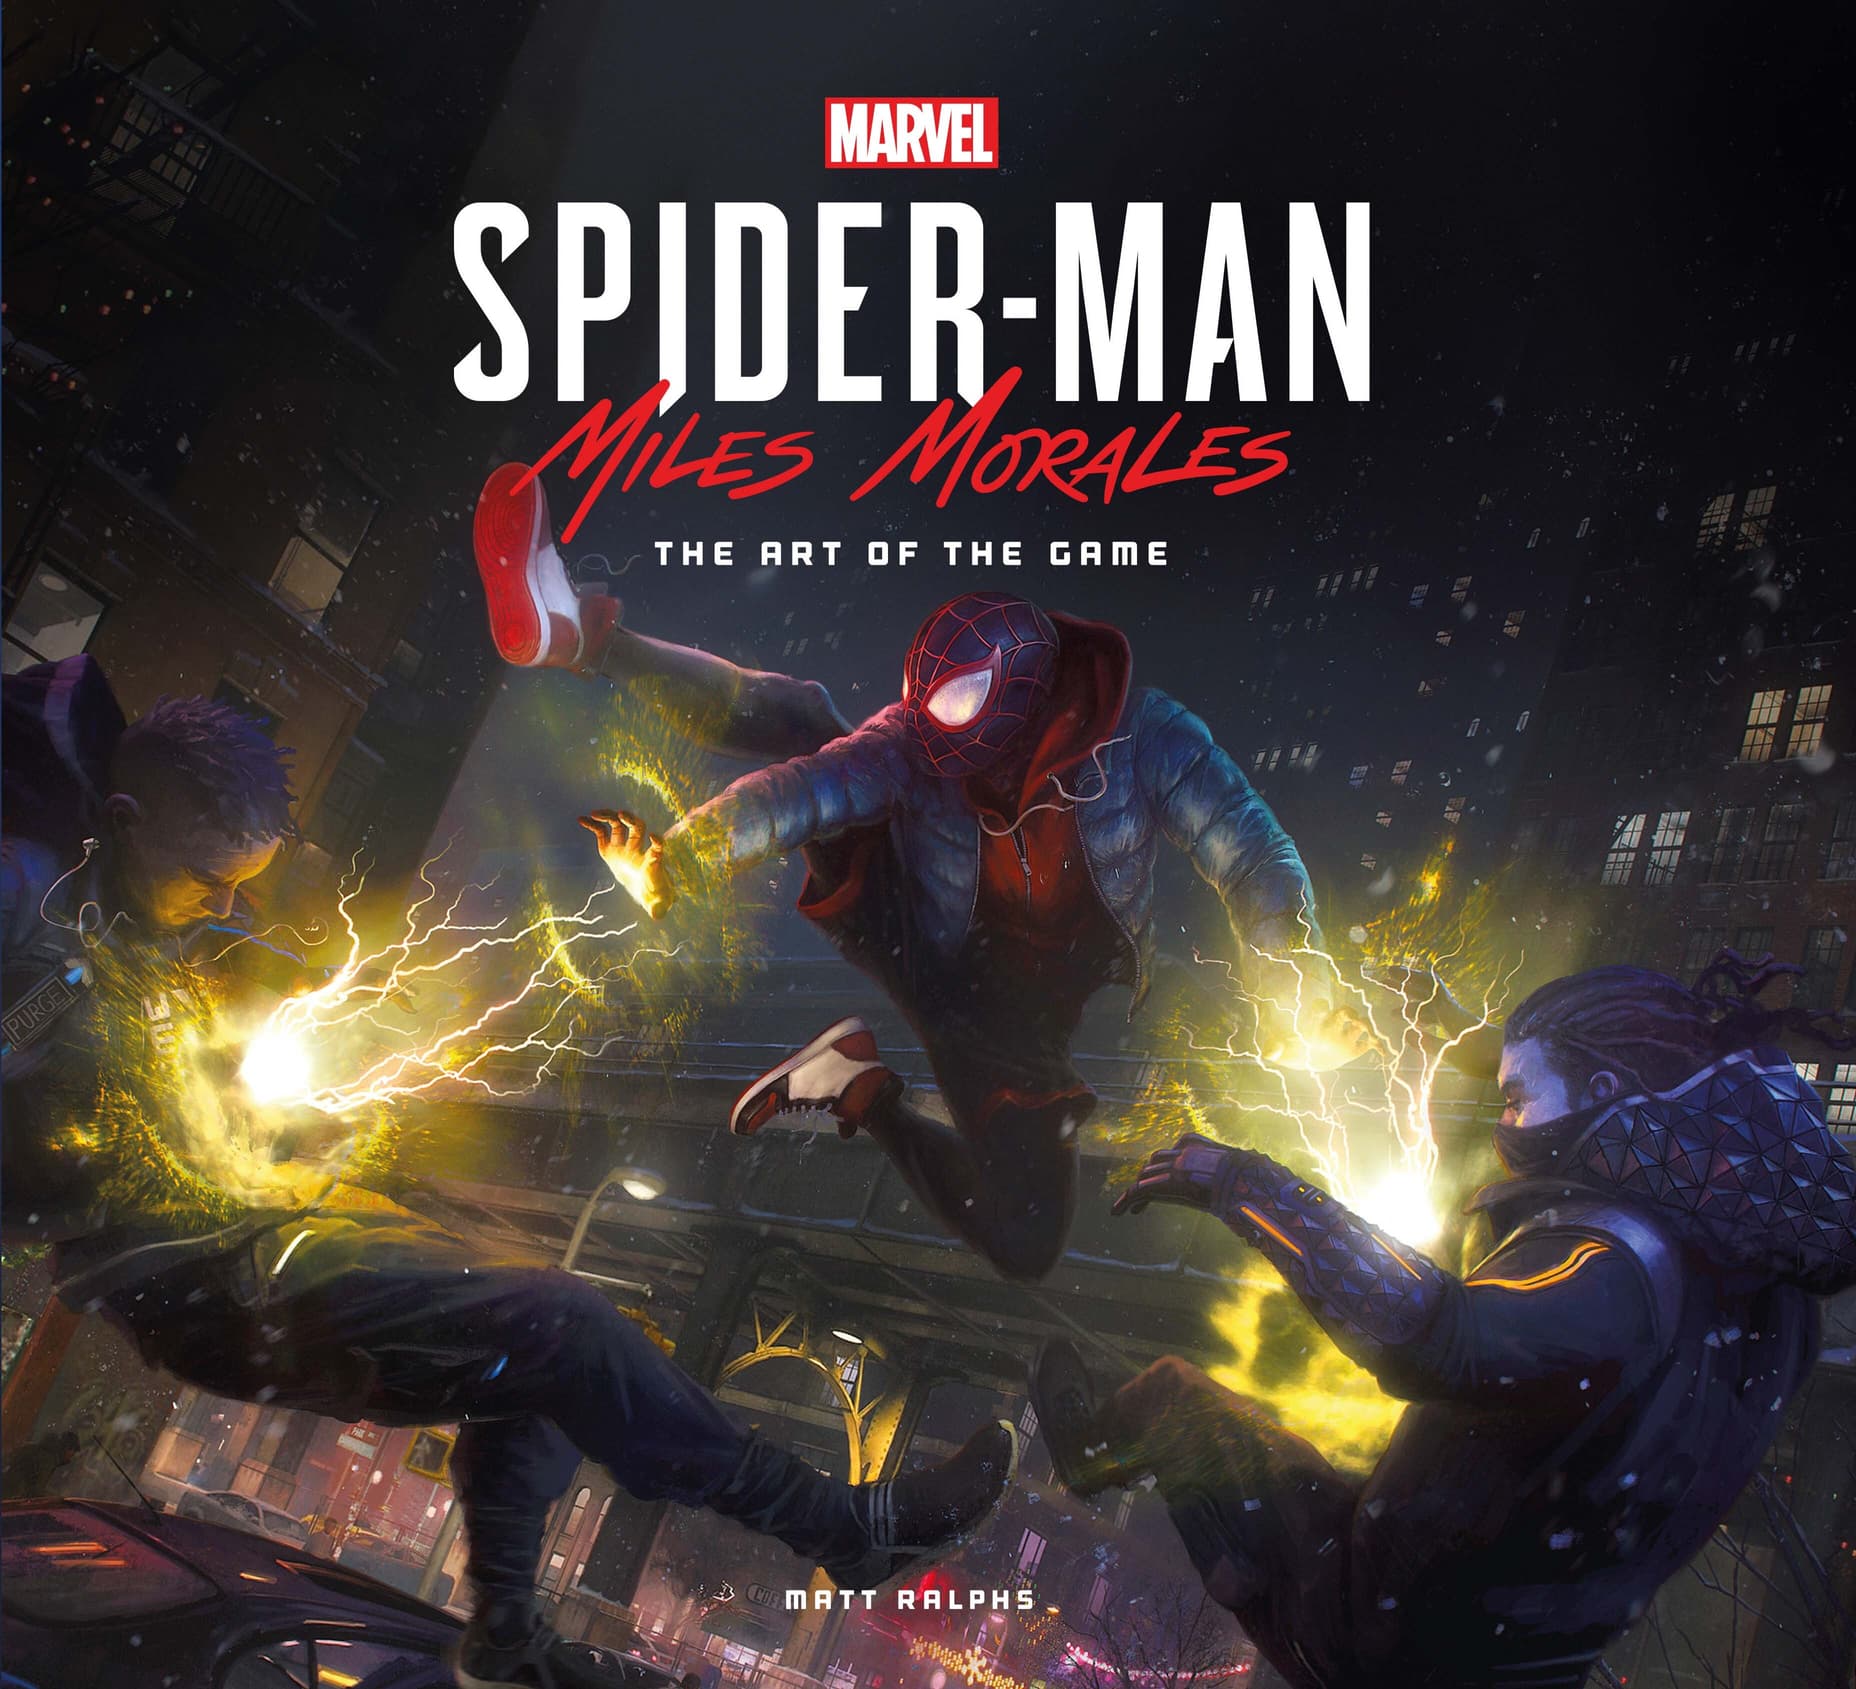 Marvel’s Spider-Man: Miles Morales – The Art of the Game